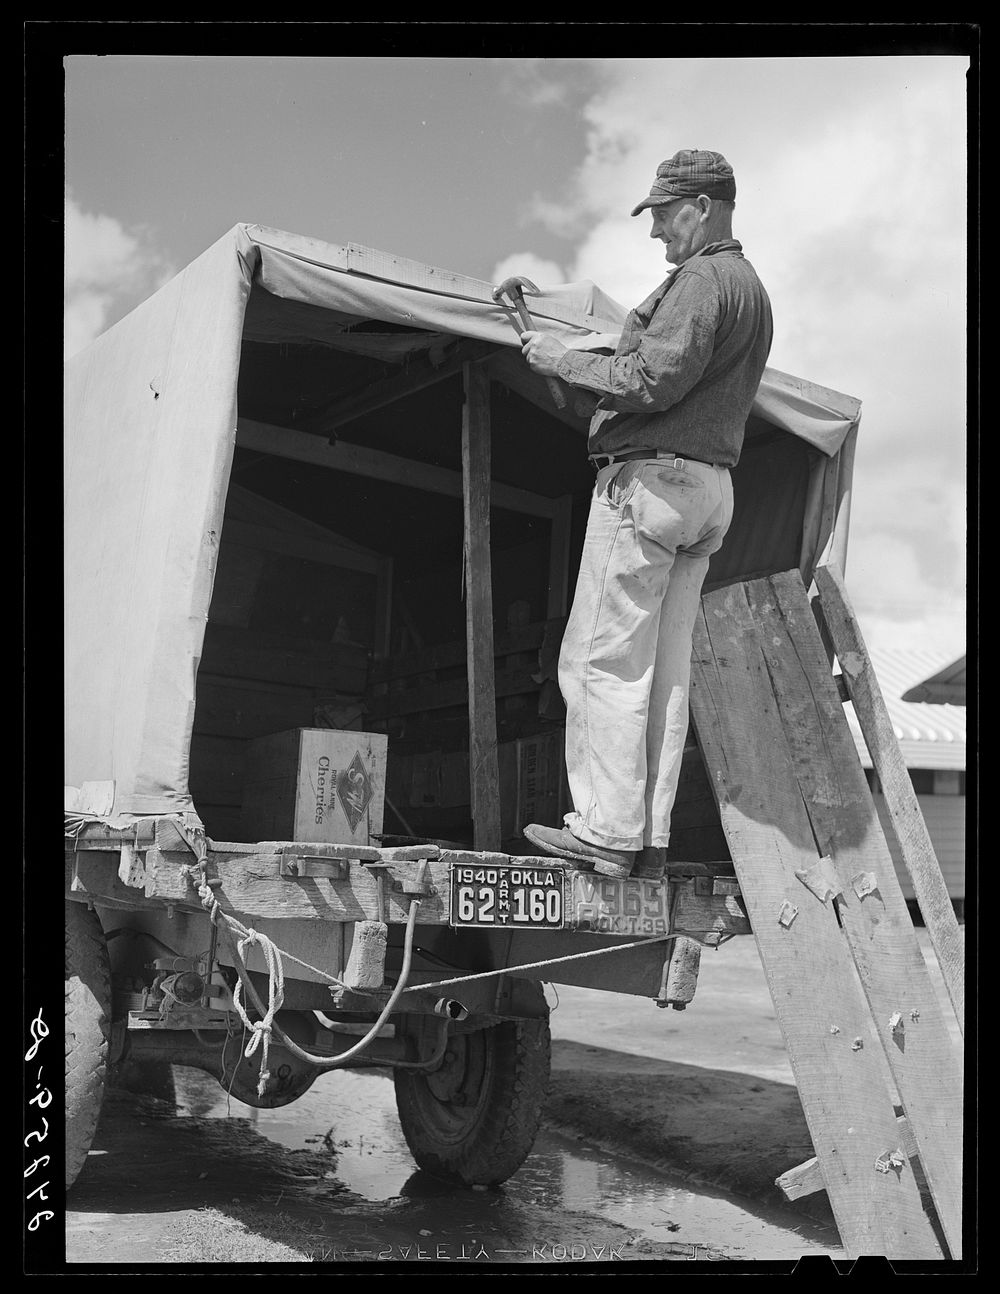 Man repairing truck. Returning to Oklahoma. Tulare migrant camp. Visalia, California. Sourced from the Library of Congress.